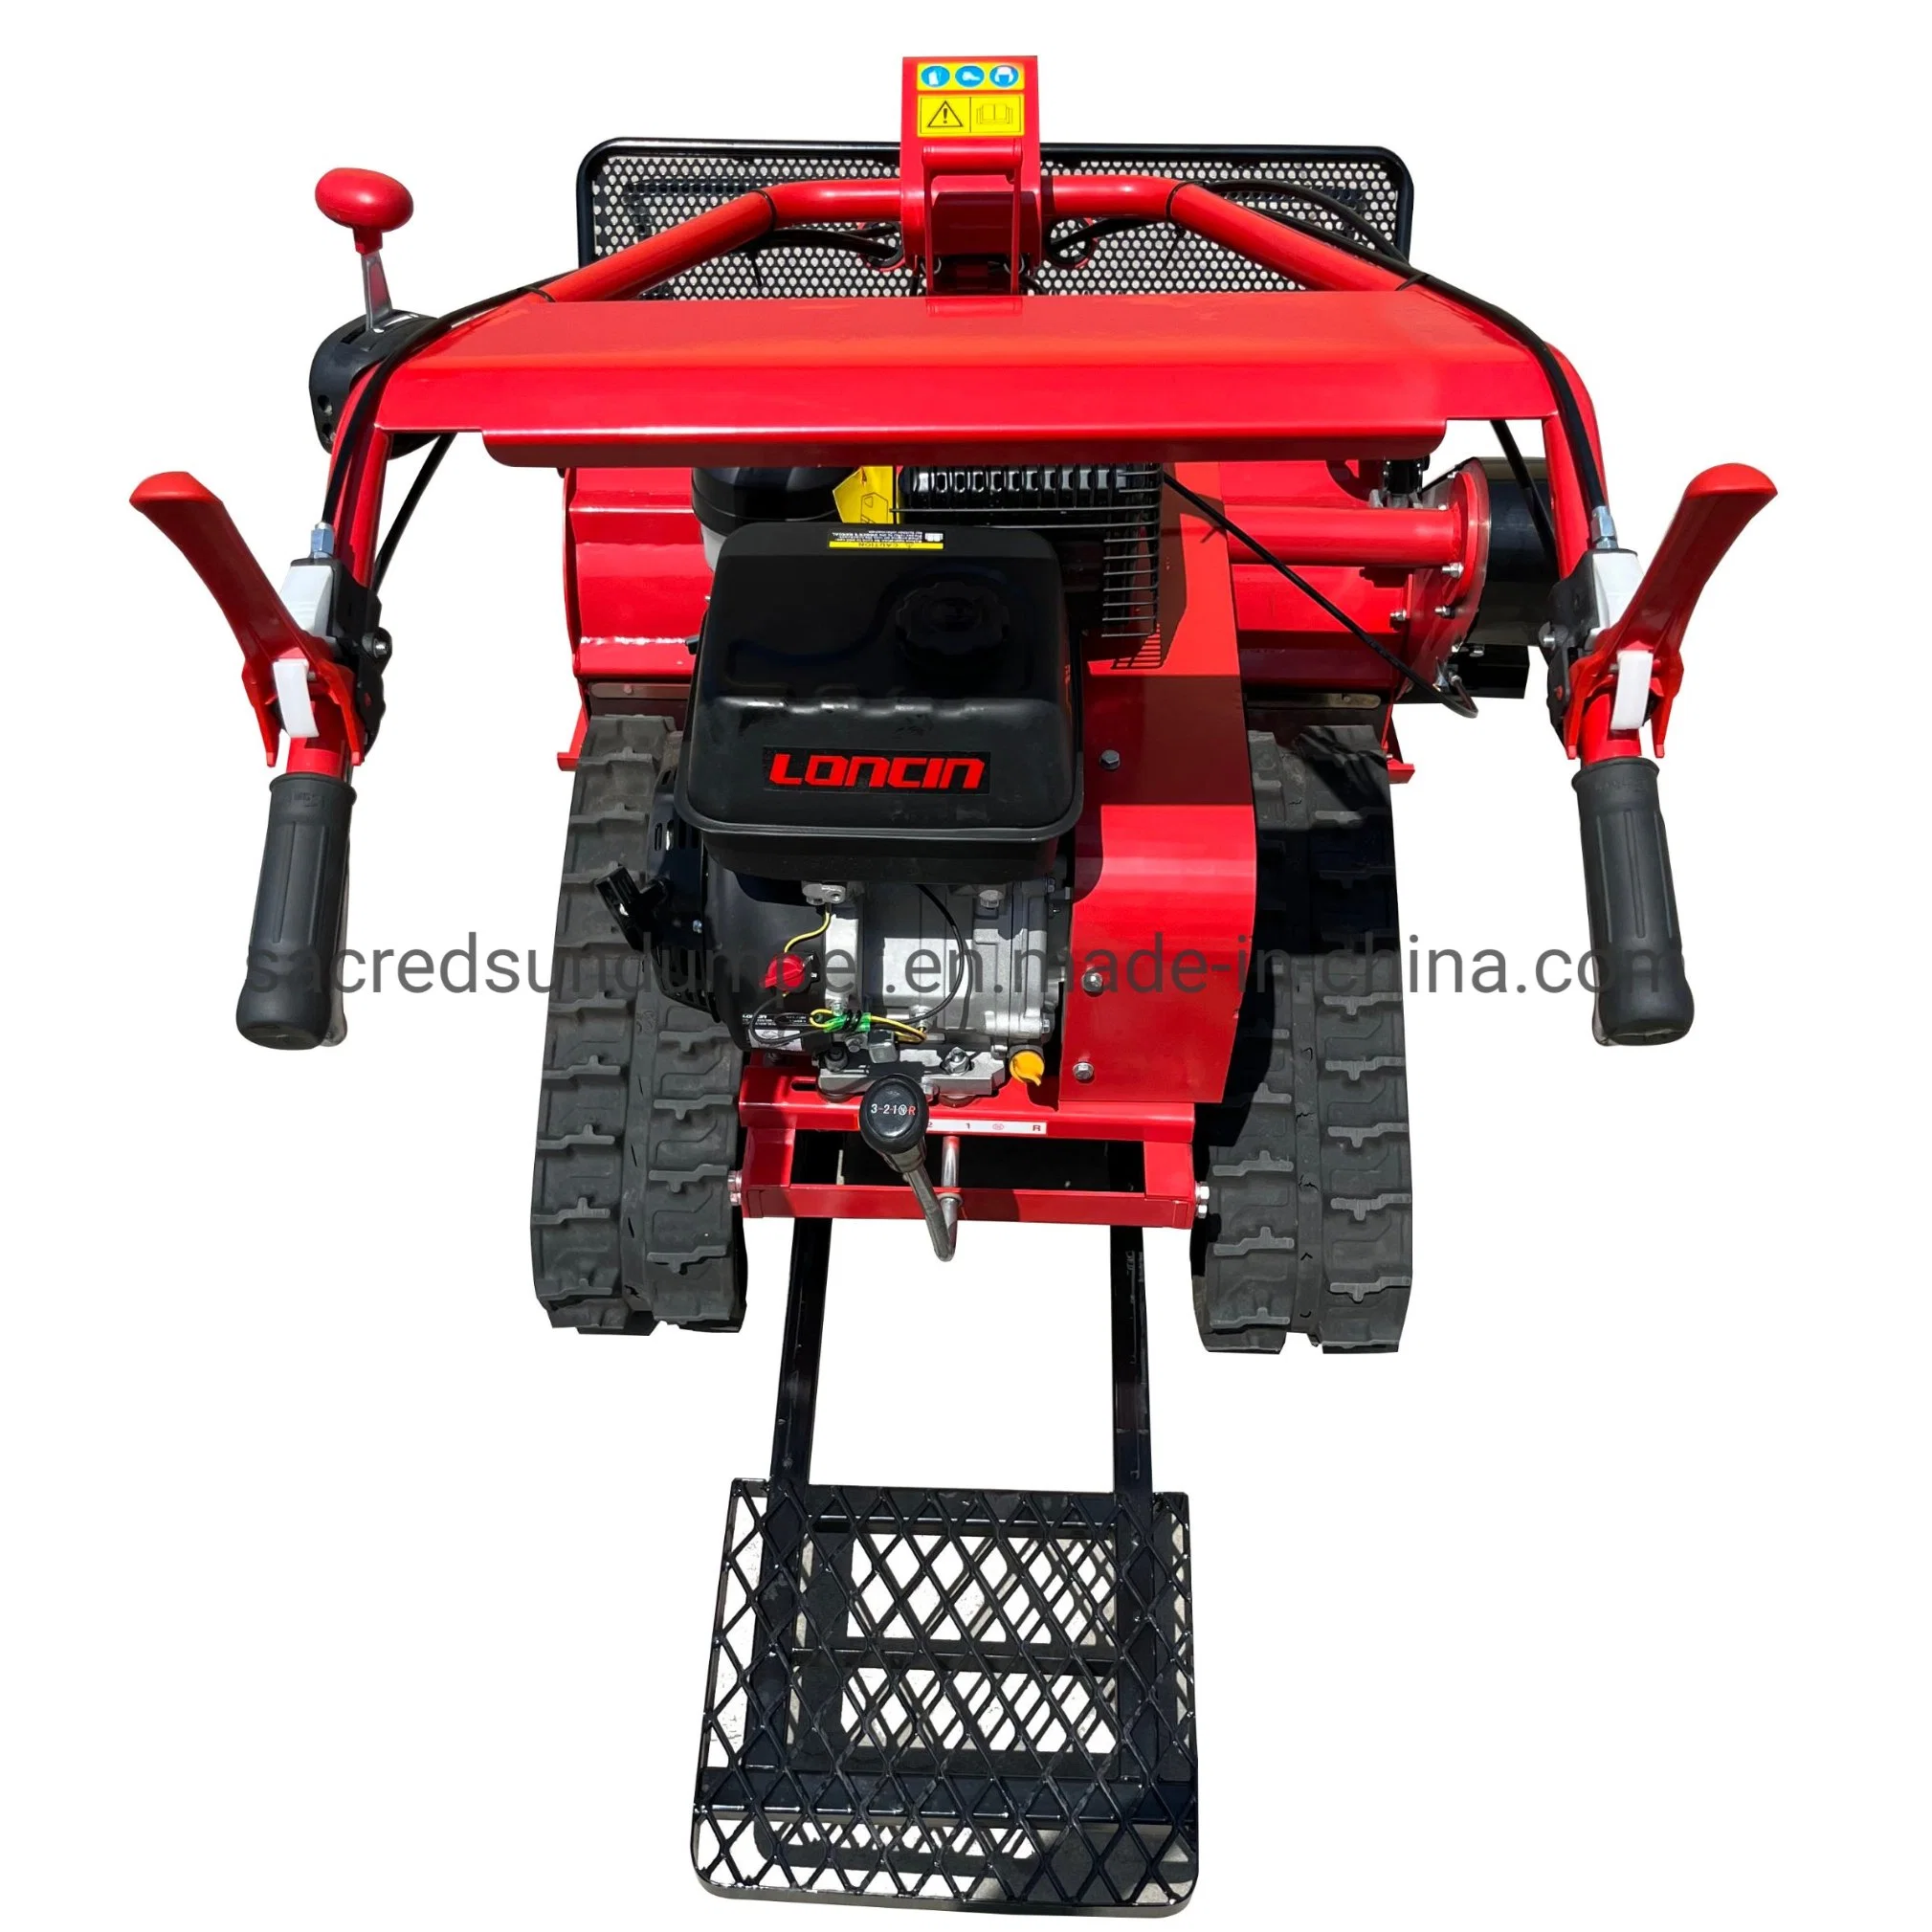 CE Certified Lawn Portable Flail Mower Grass Mower